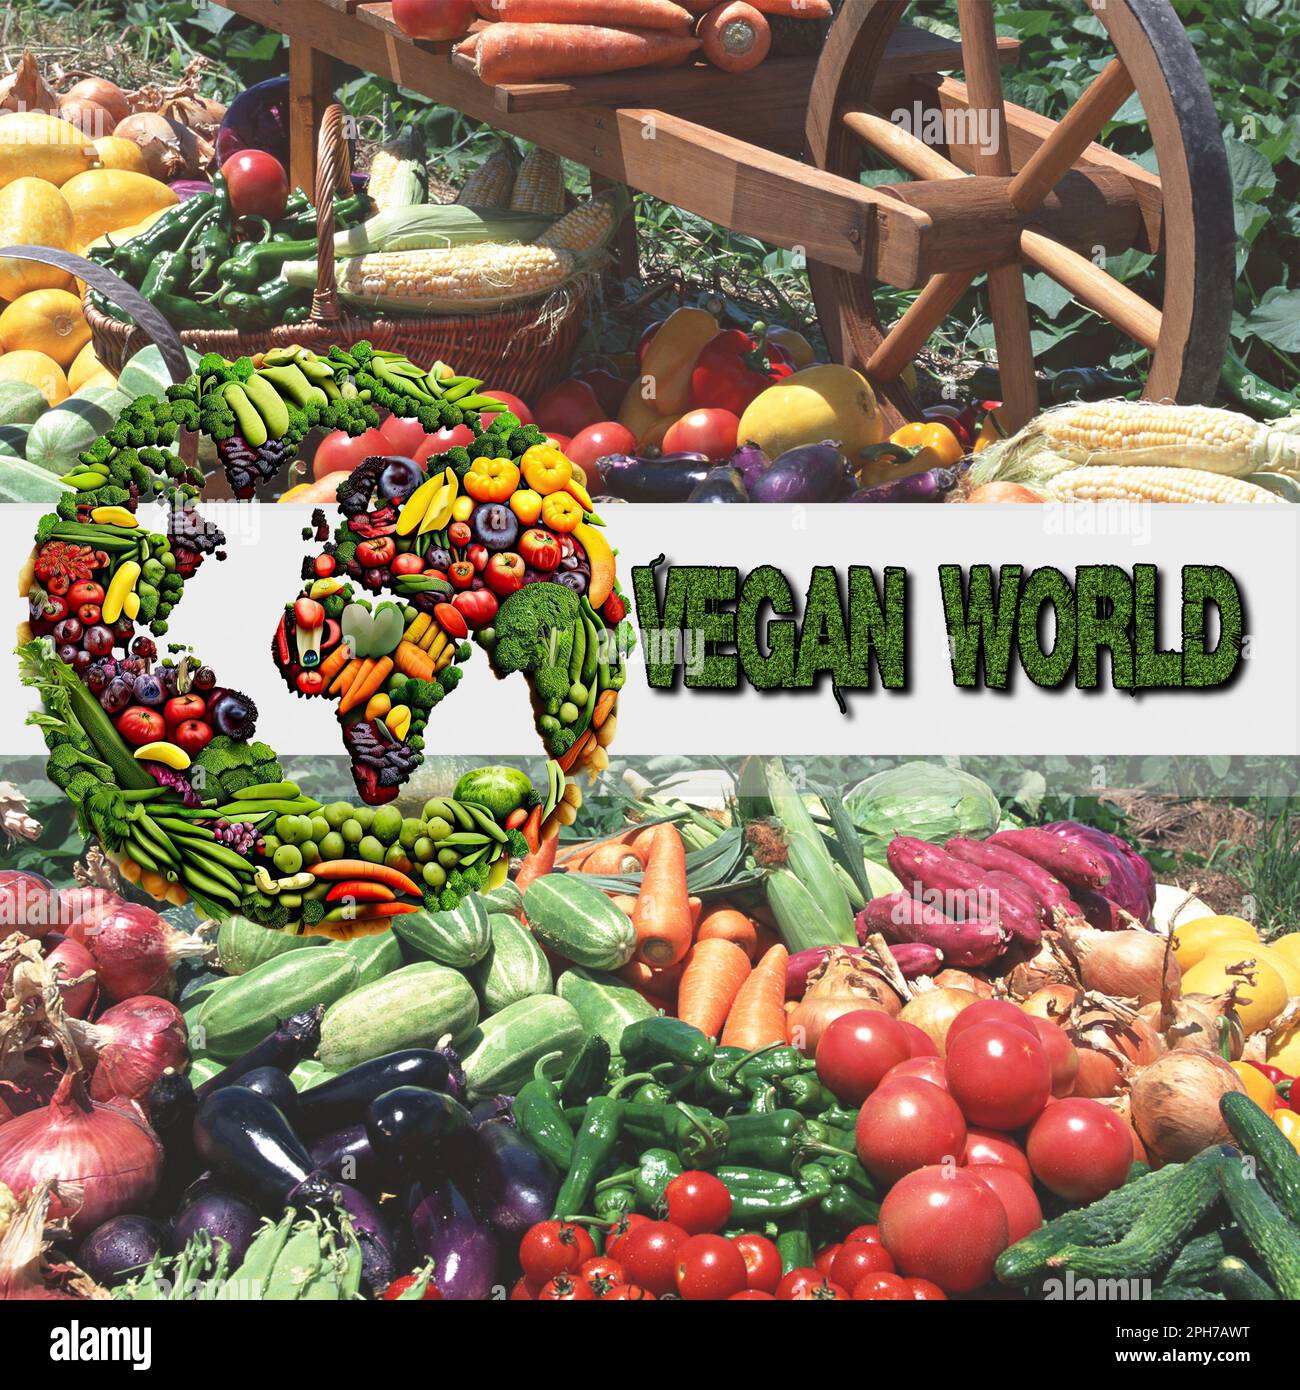 Vegan World - An image that represents a terrestrial globe made up of fruit and vegetables immersed in a green and eco-sustainable environment Stock Photo